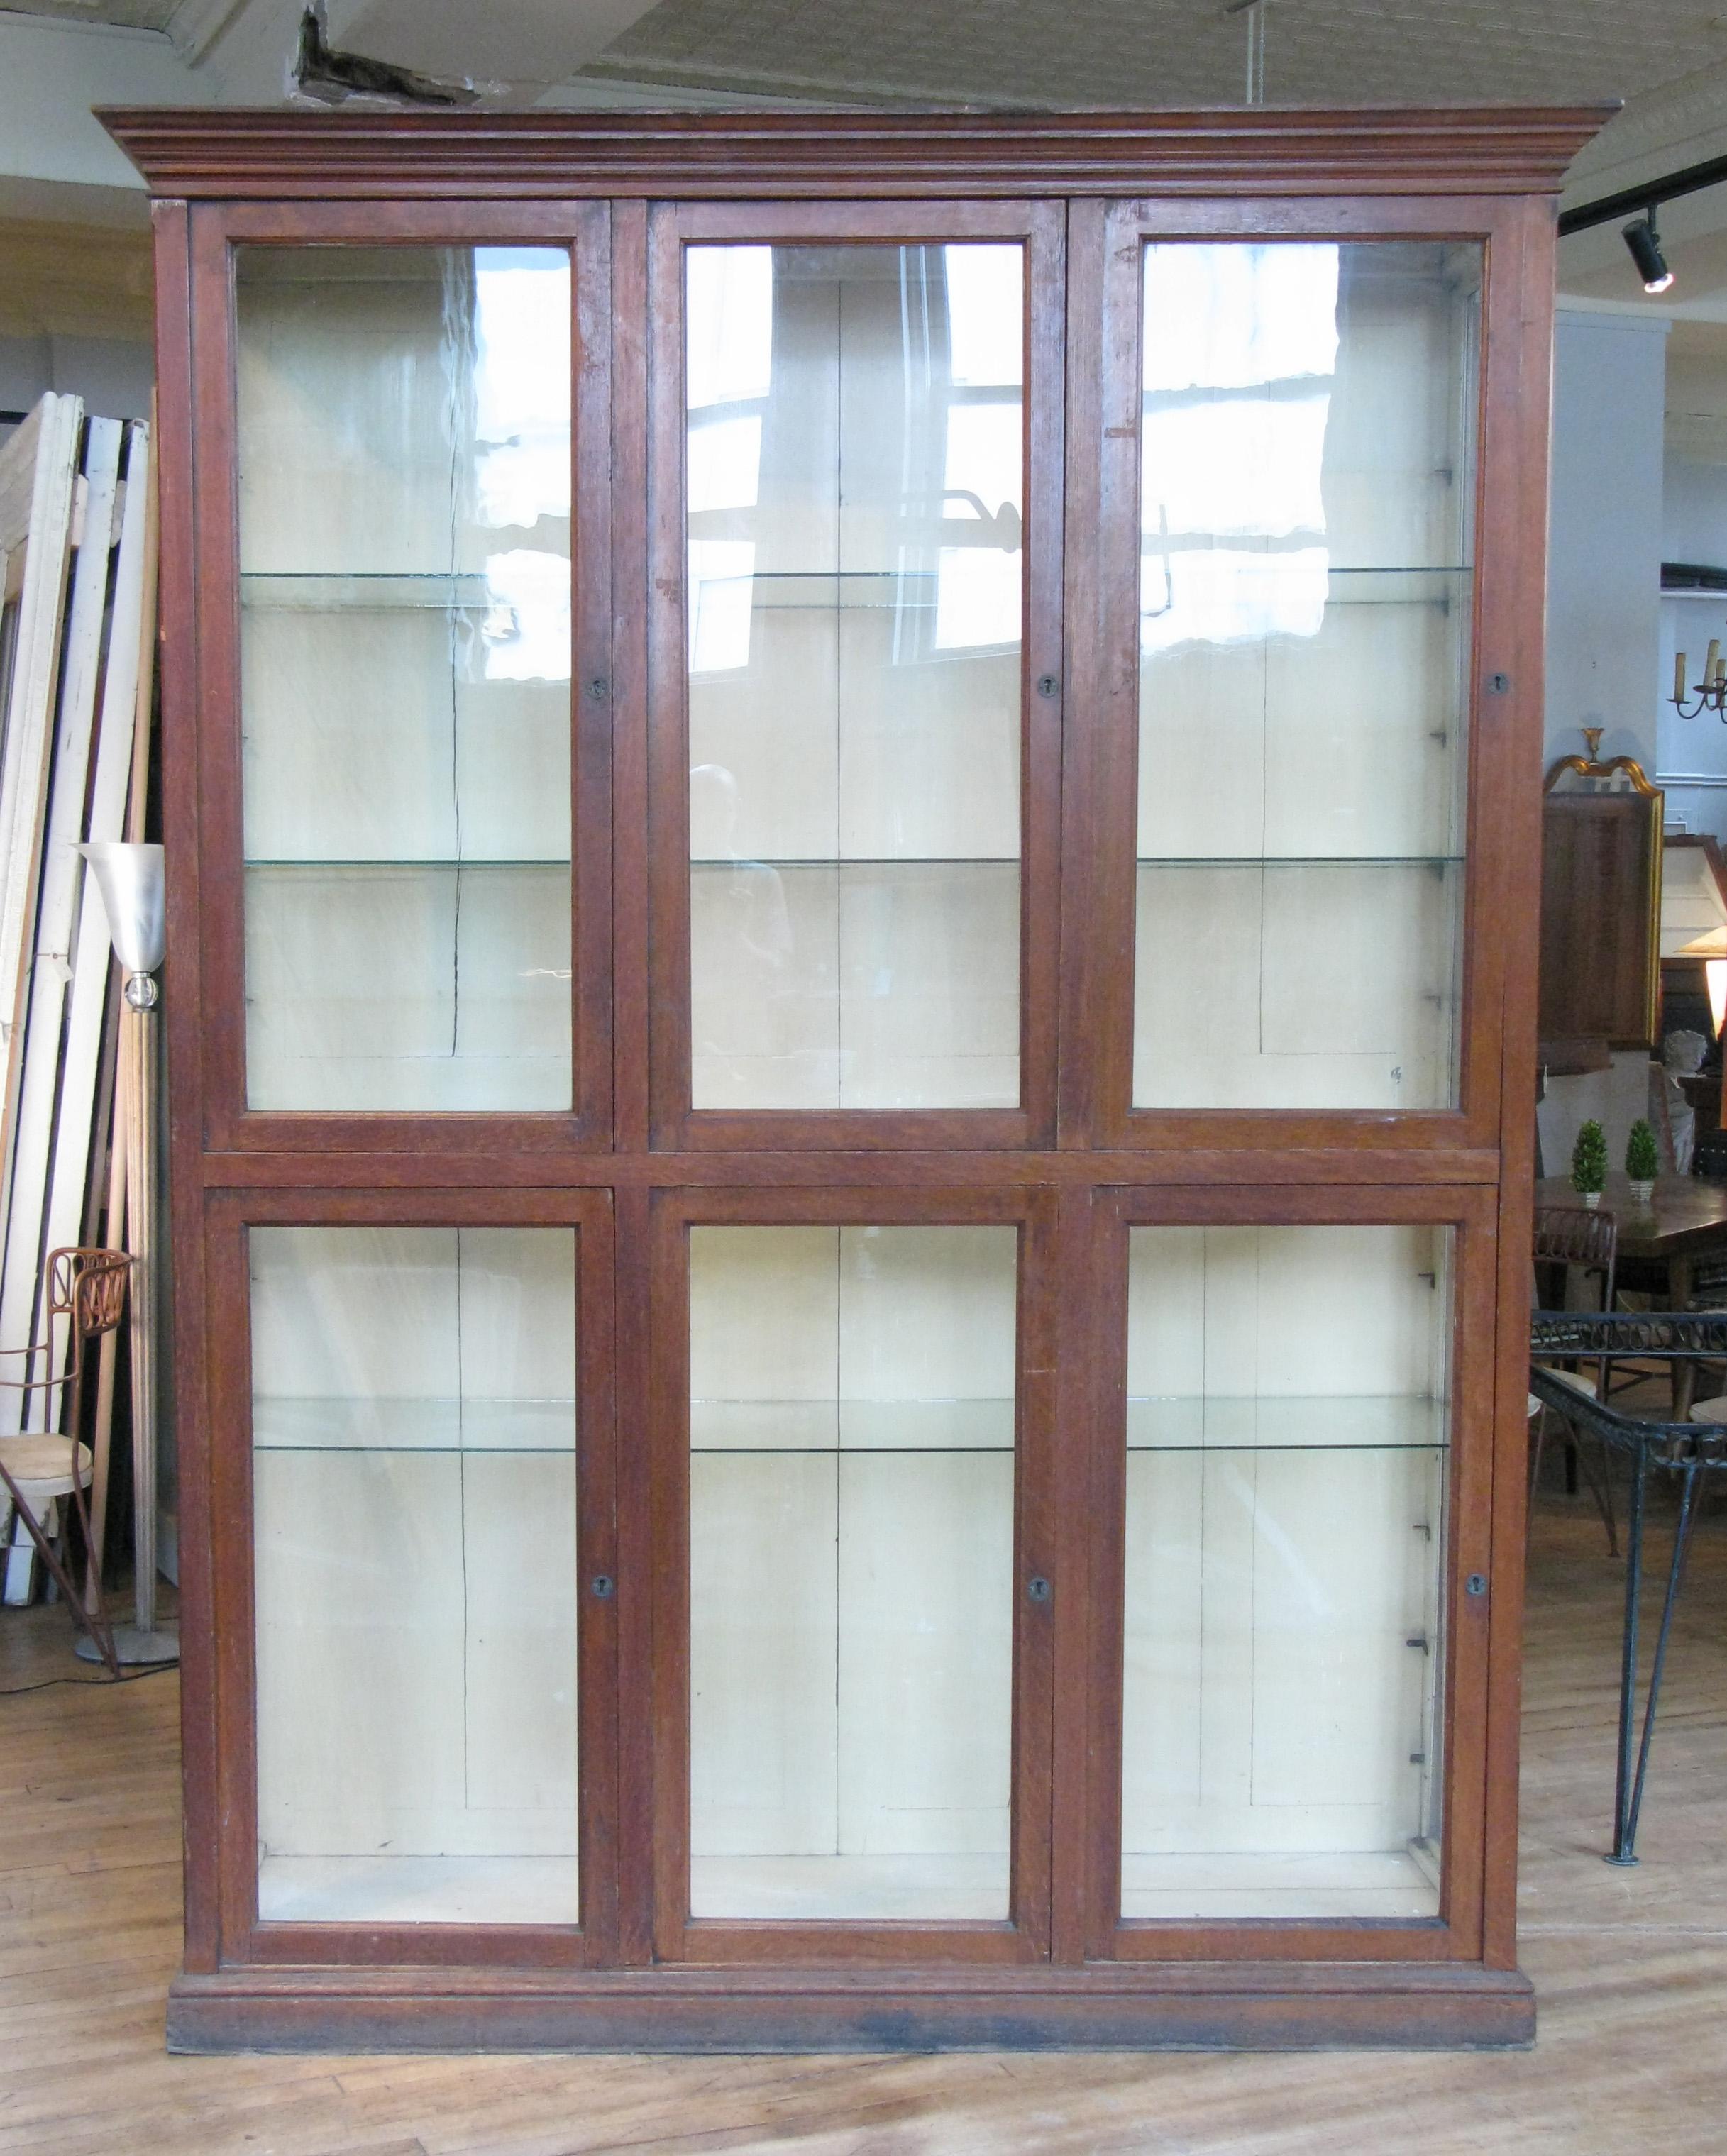 A very handsome antique late 19th century display cabinet with an oak case and glass doors and side lights. The interior back in its original pale cream color, and with four full width glass shelves.